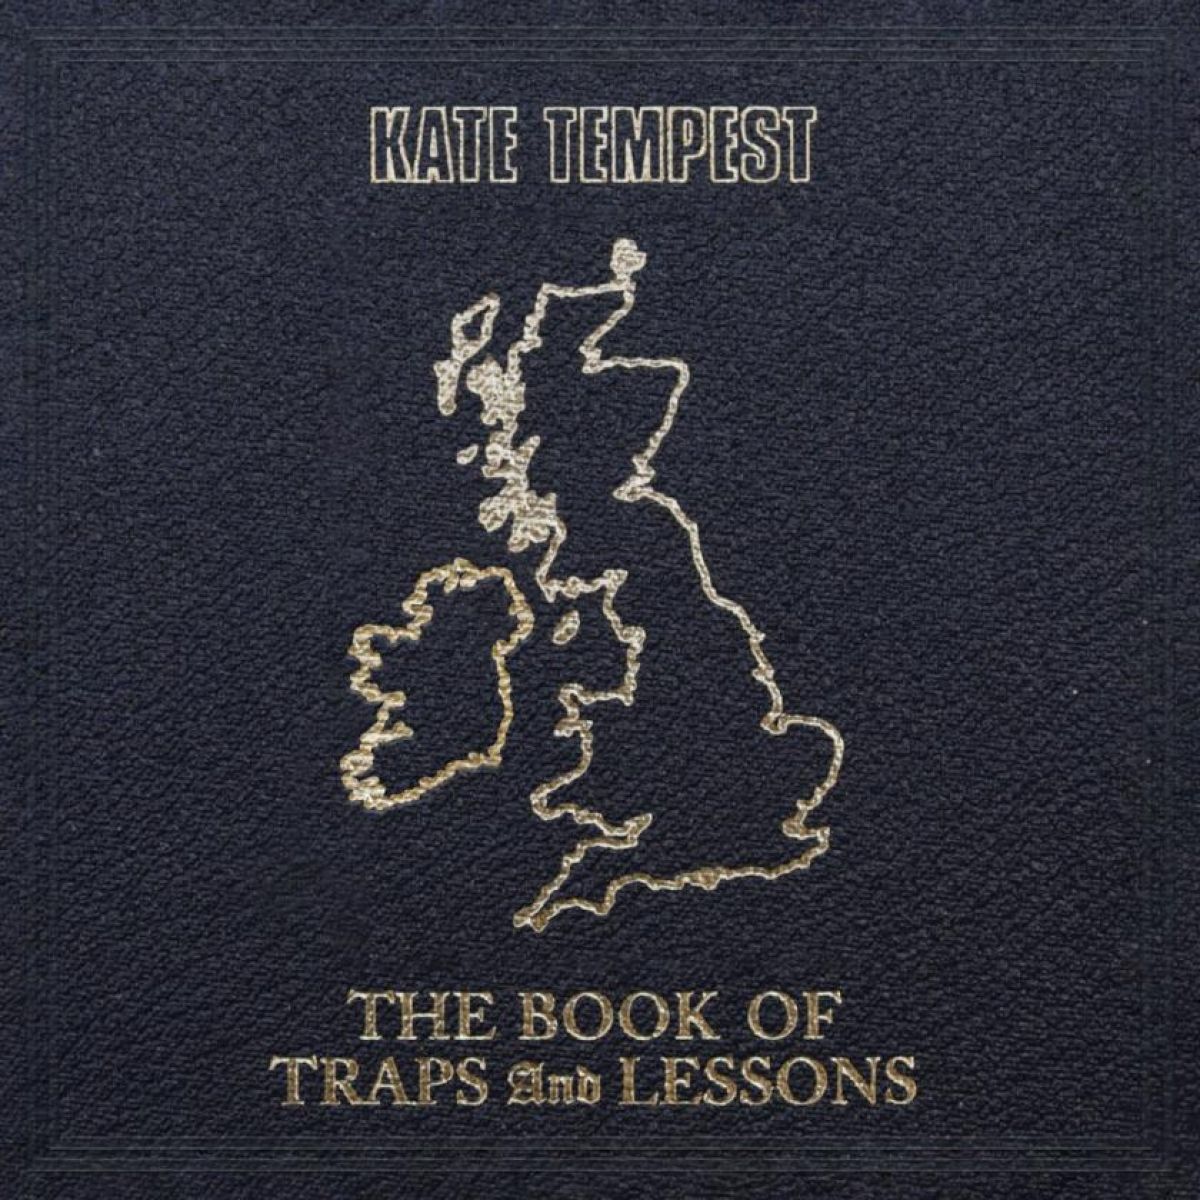 Kate Tempest - The Book of Traps And Lessons - BROKEN 8 RECORDS